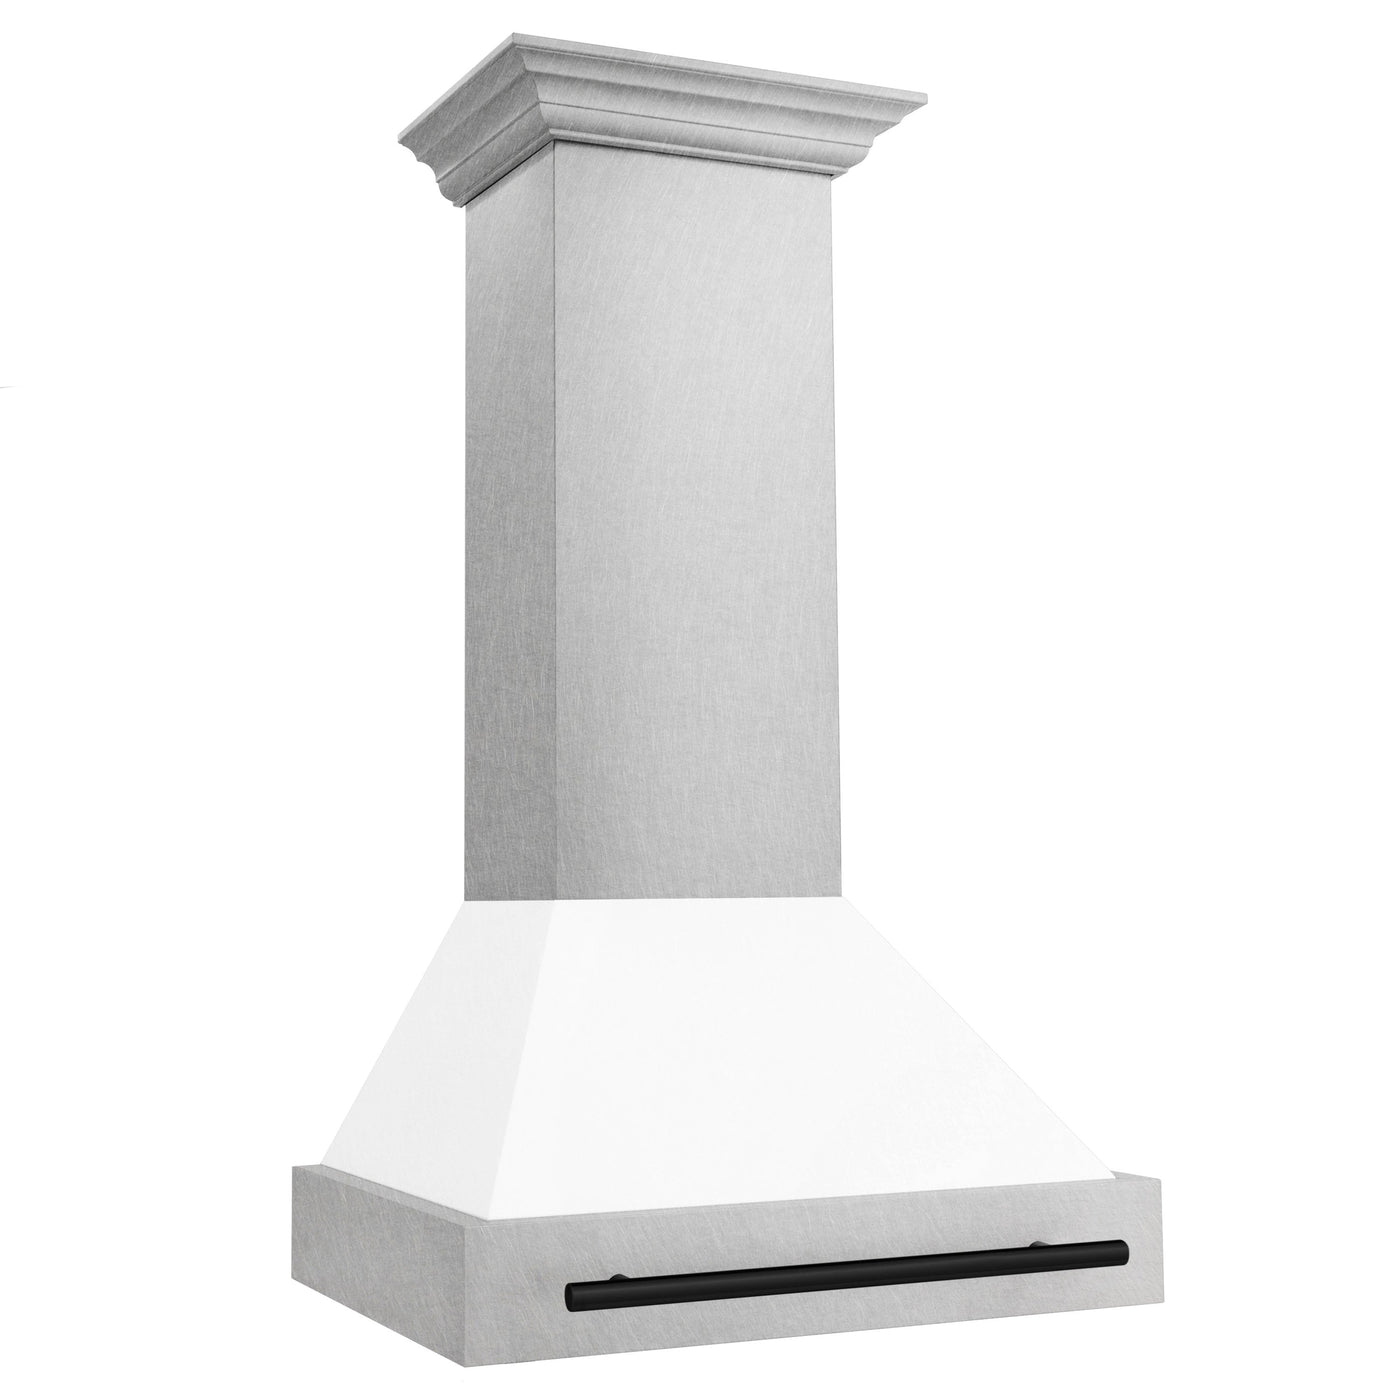 30" ZLINE Autograph Edition DuraSnow® Stainless Steel Range Hood with White Matte Shell and Gold Handle